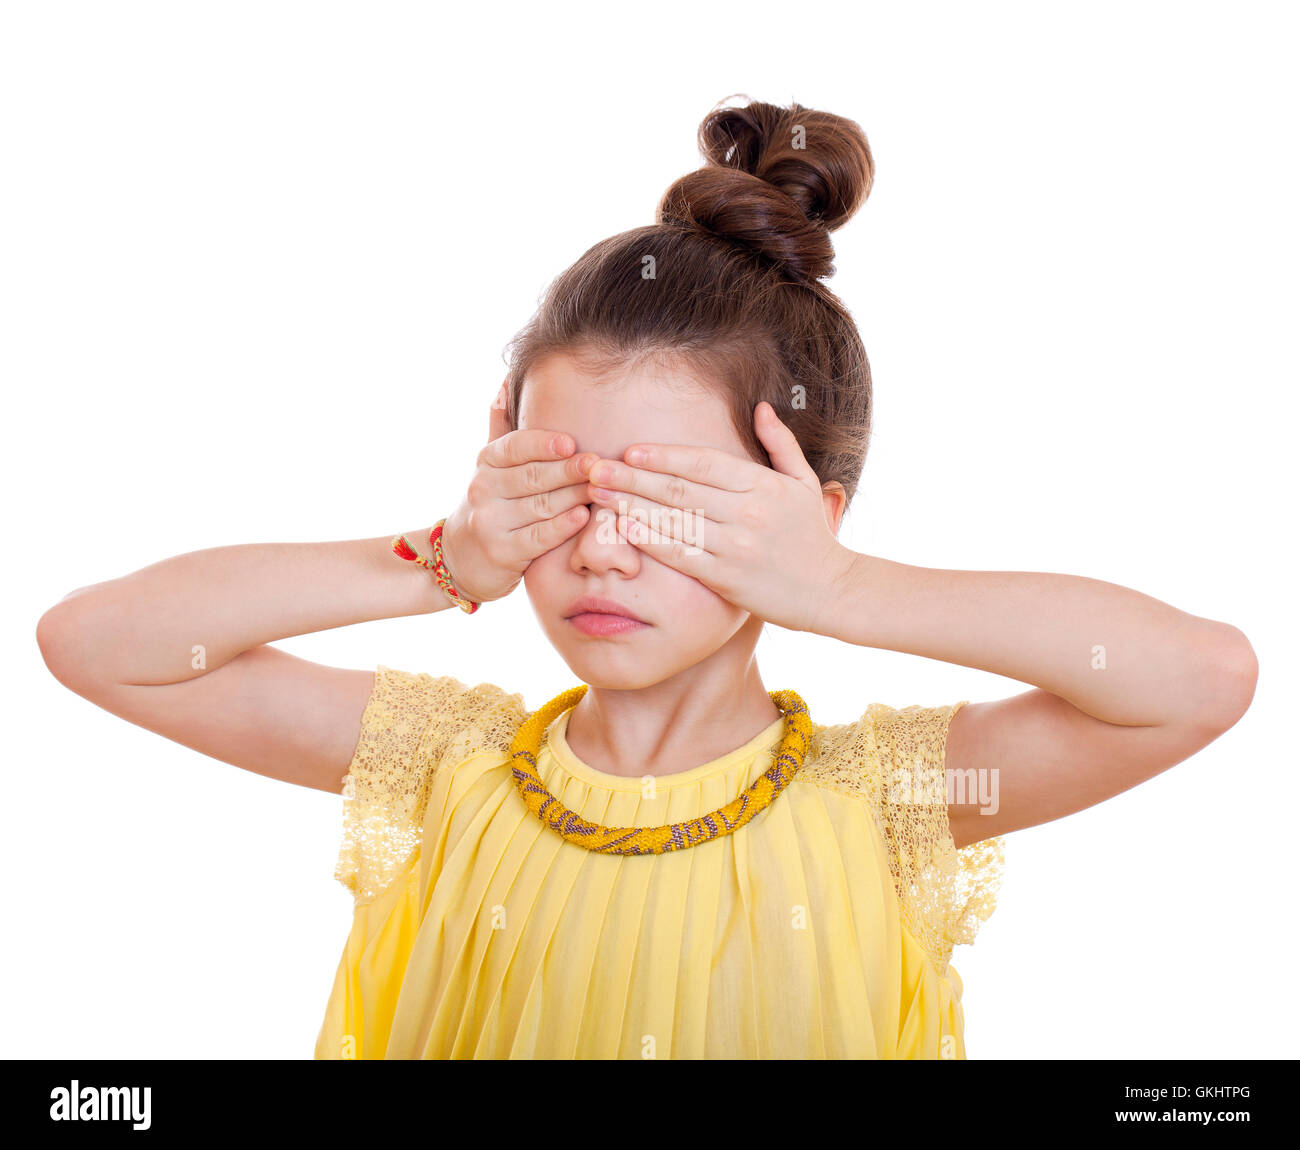 See No Evil, Hear No Evil, do not say anything, Portrait of beautiful little girl, studio on white background Stock Photo